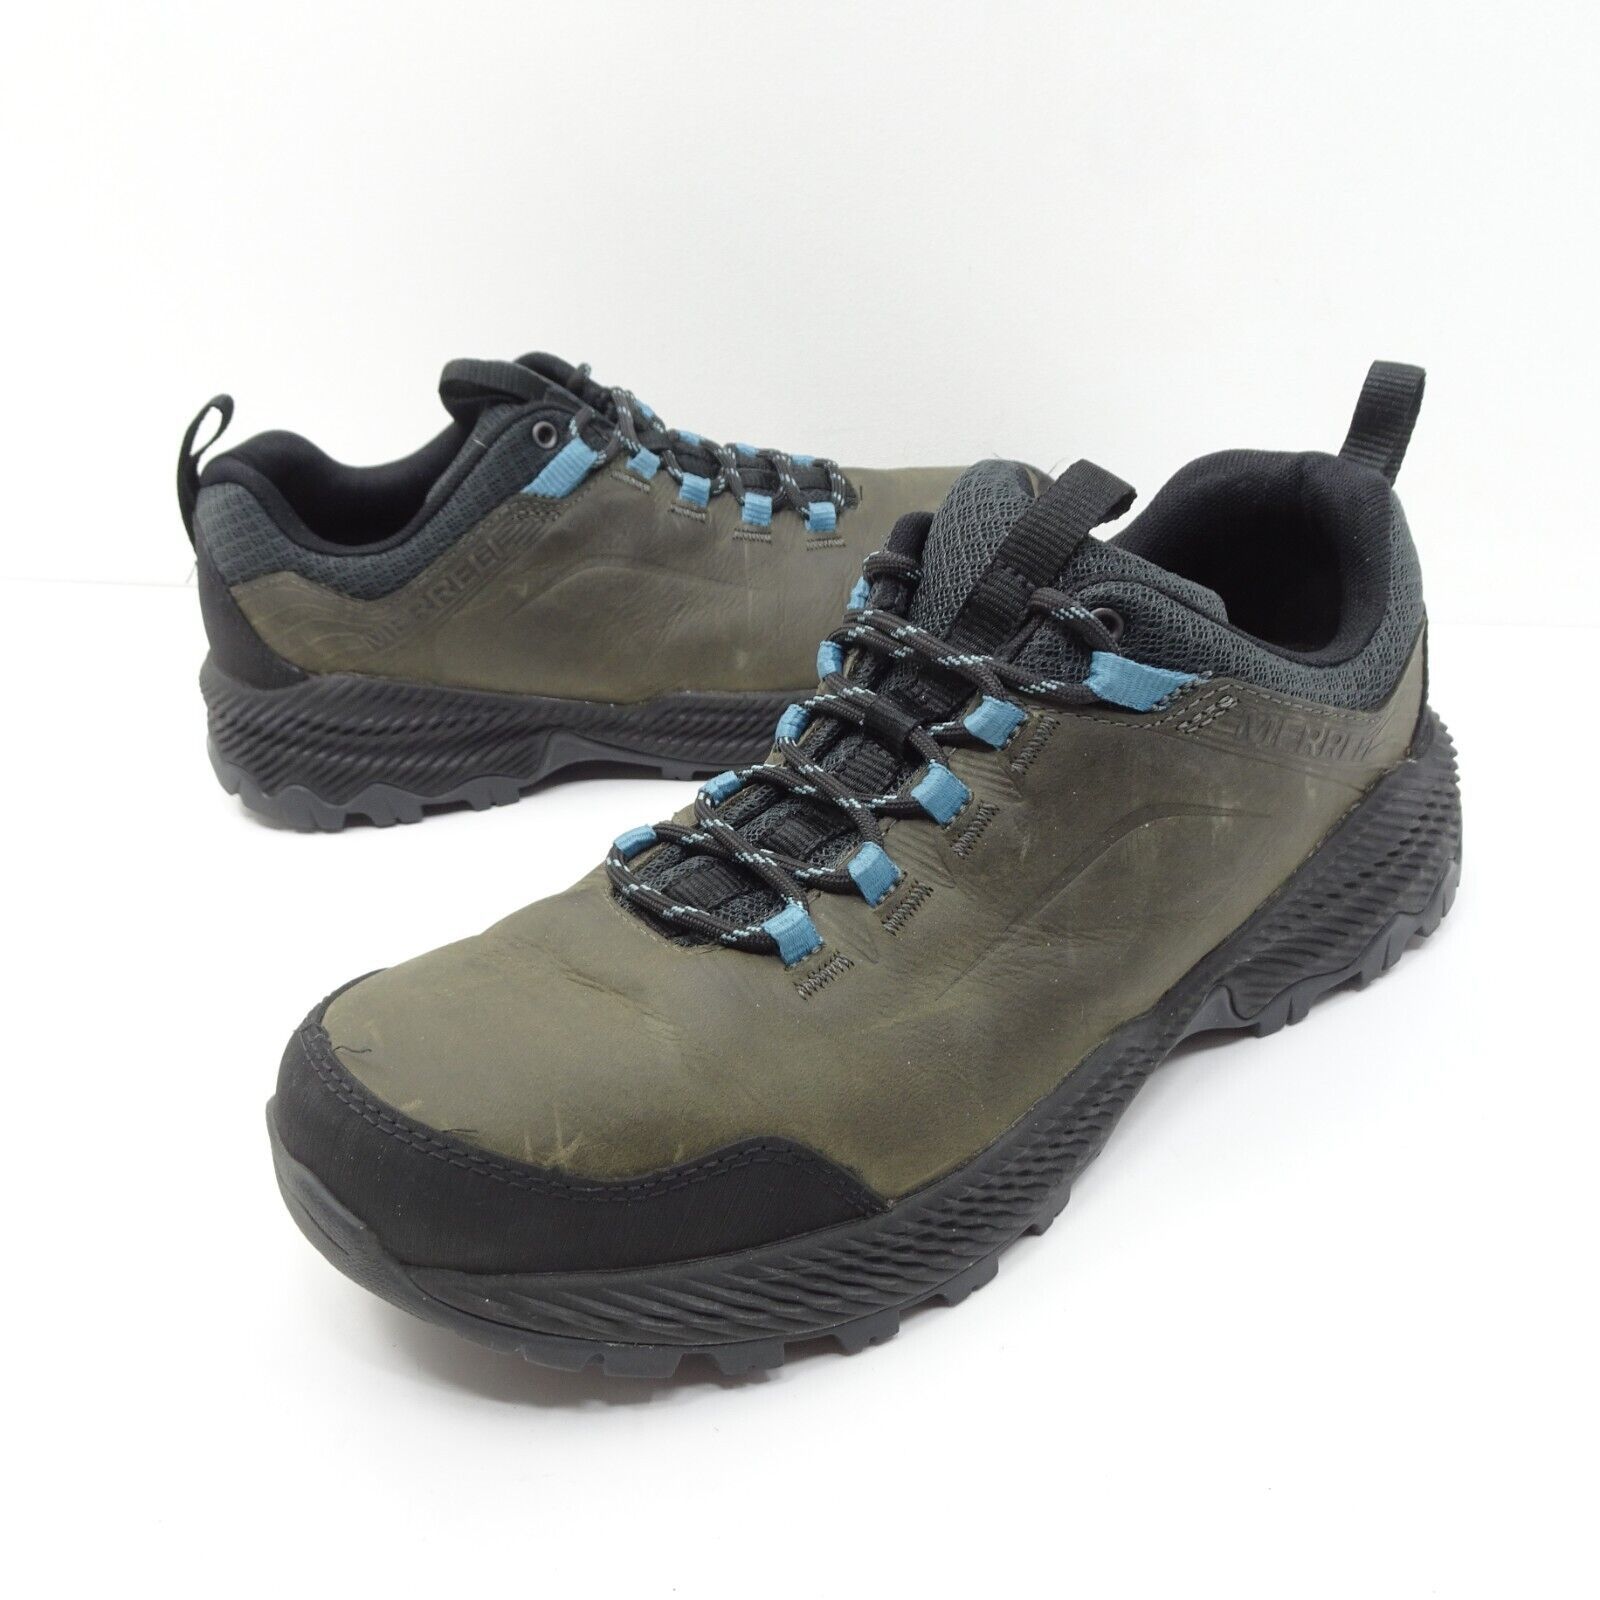 Primary image for Merrell Womens Forestbound Boulder Hiking Shoes J77280 Lace Up Low Top Mesh 9